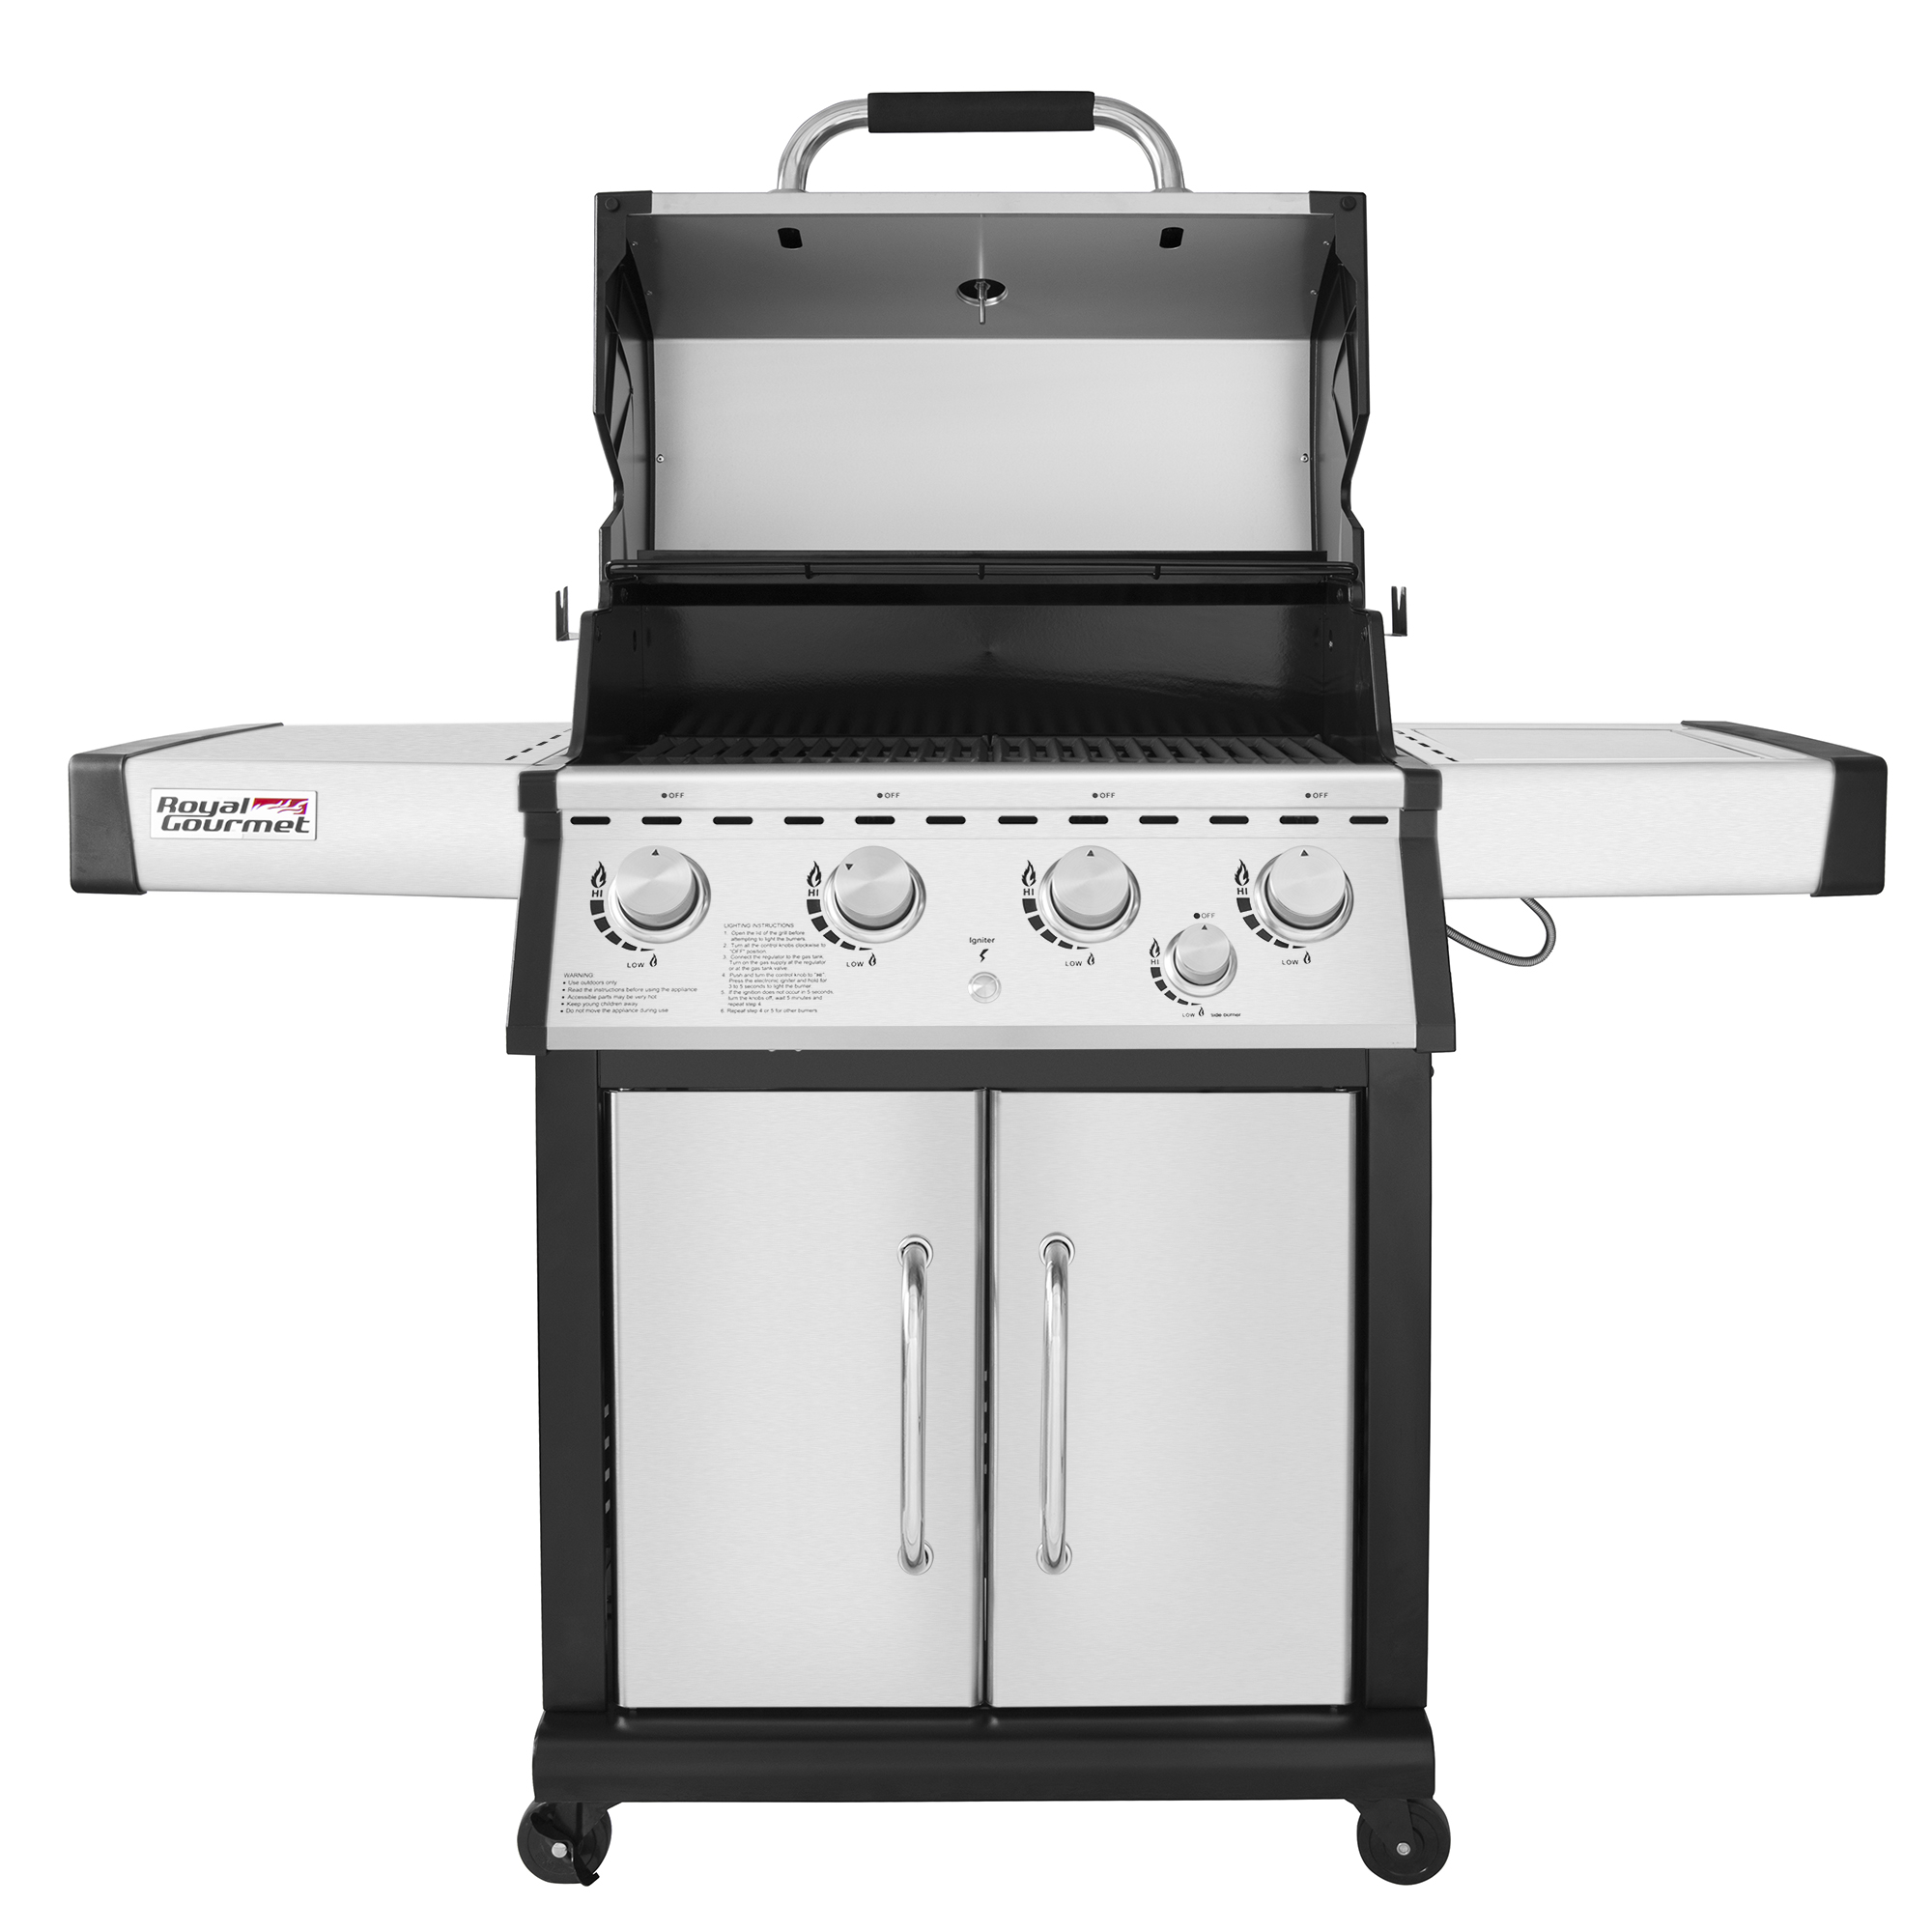 Royal Gourmet MG4001 4-Burner Propane Gas Grill with Side Burner, Stainless Steel, 60000 BTU - image 2 of 7